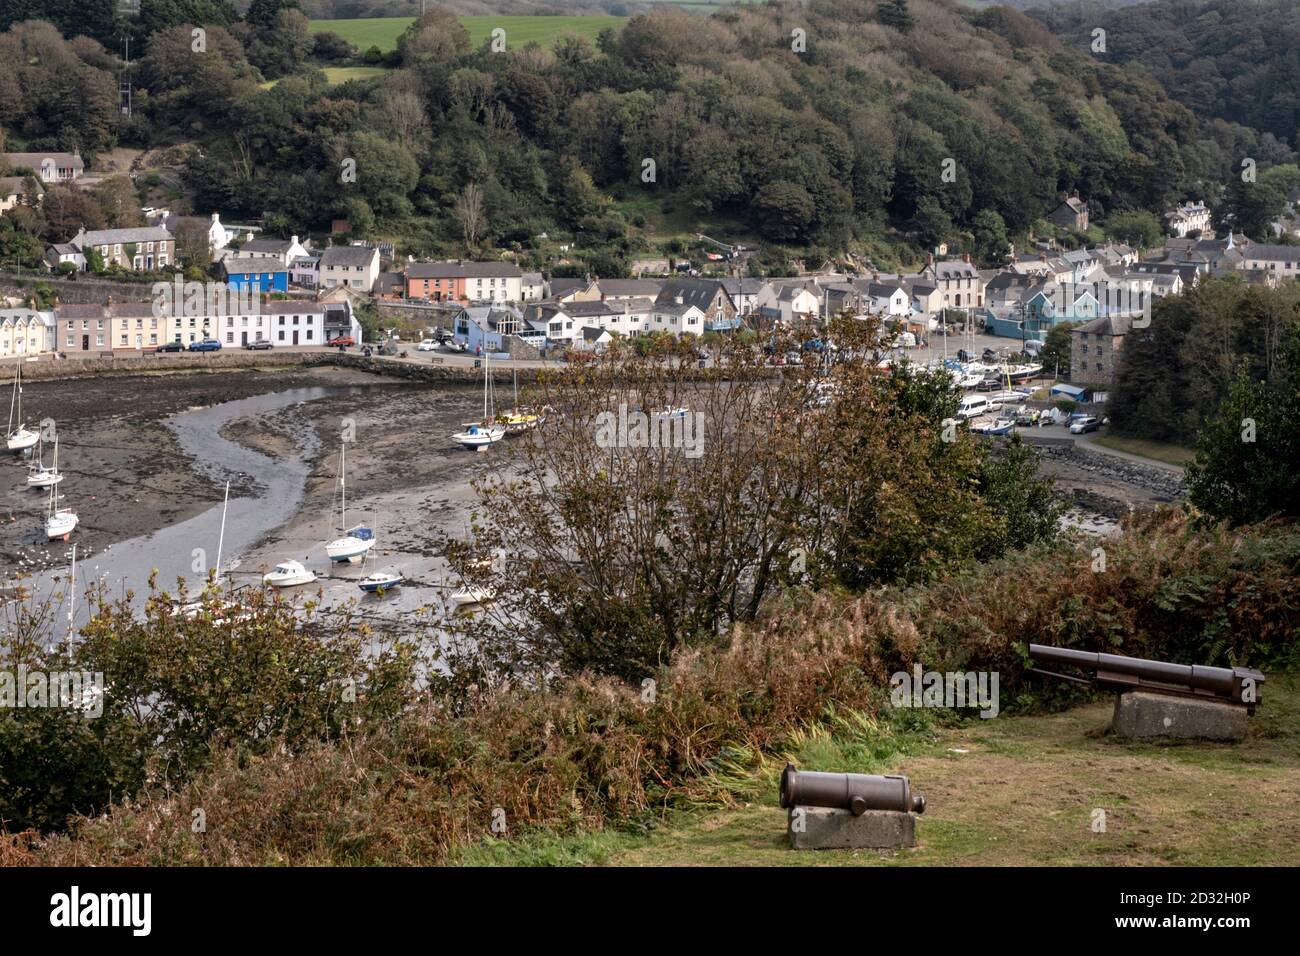 View of the Lower Town and the picturesque harbour of Fishguard, Pembrokeshire, Wales, UK Stock Photo